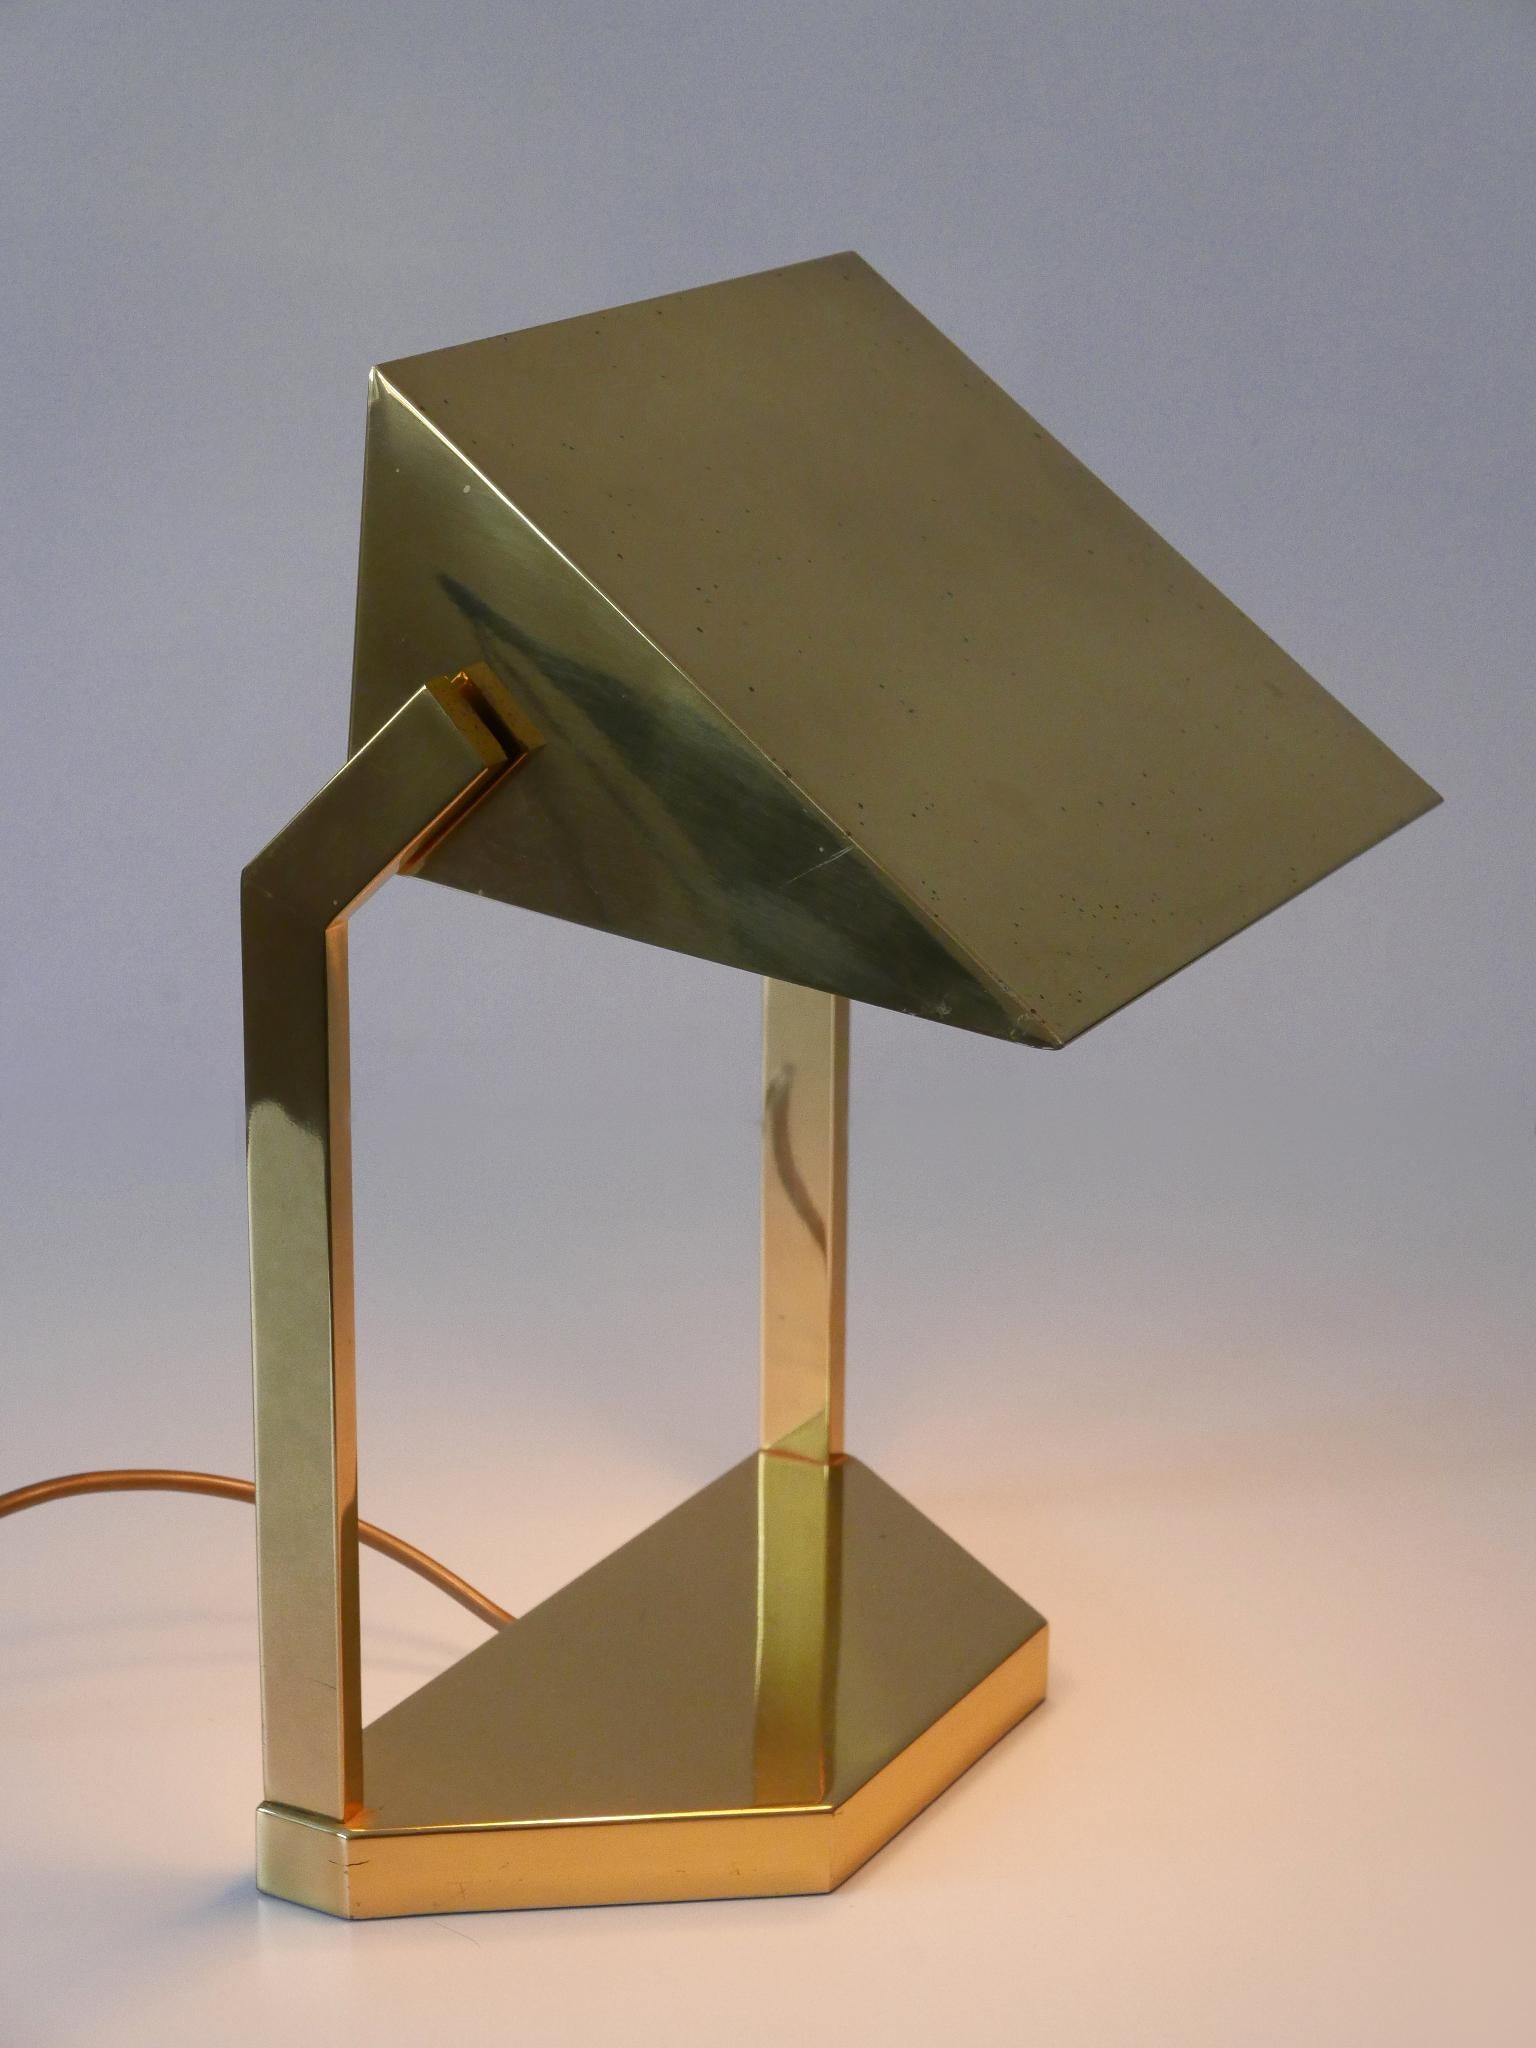 Rare and elegant Mid-Century Modern desk light or table lamp with adjustable shade. Designed and manufactured by Vereinigte Werkstätten München, Germany, 1960s.

Executed in heavy solid brass and lucite, the lamp comes with 2 x E14 / E12 Edison